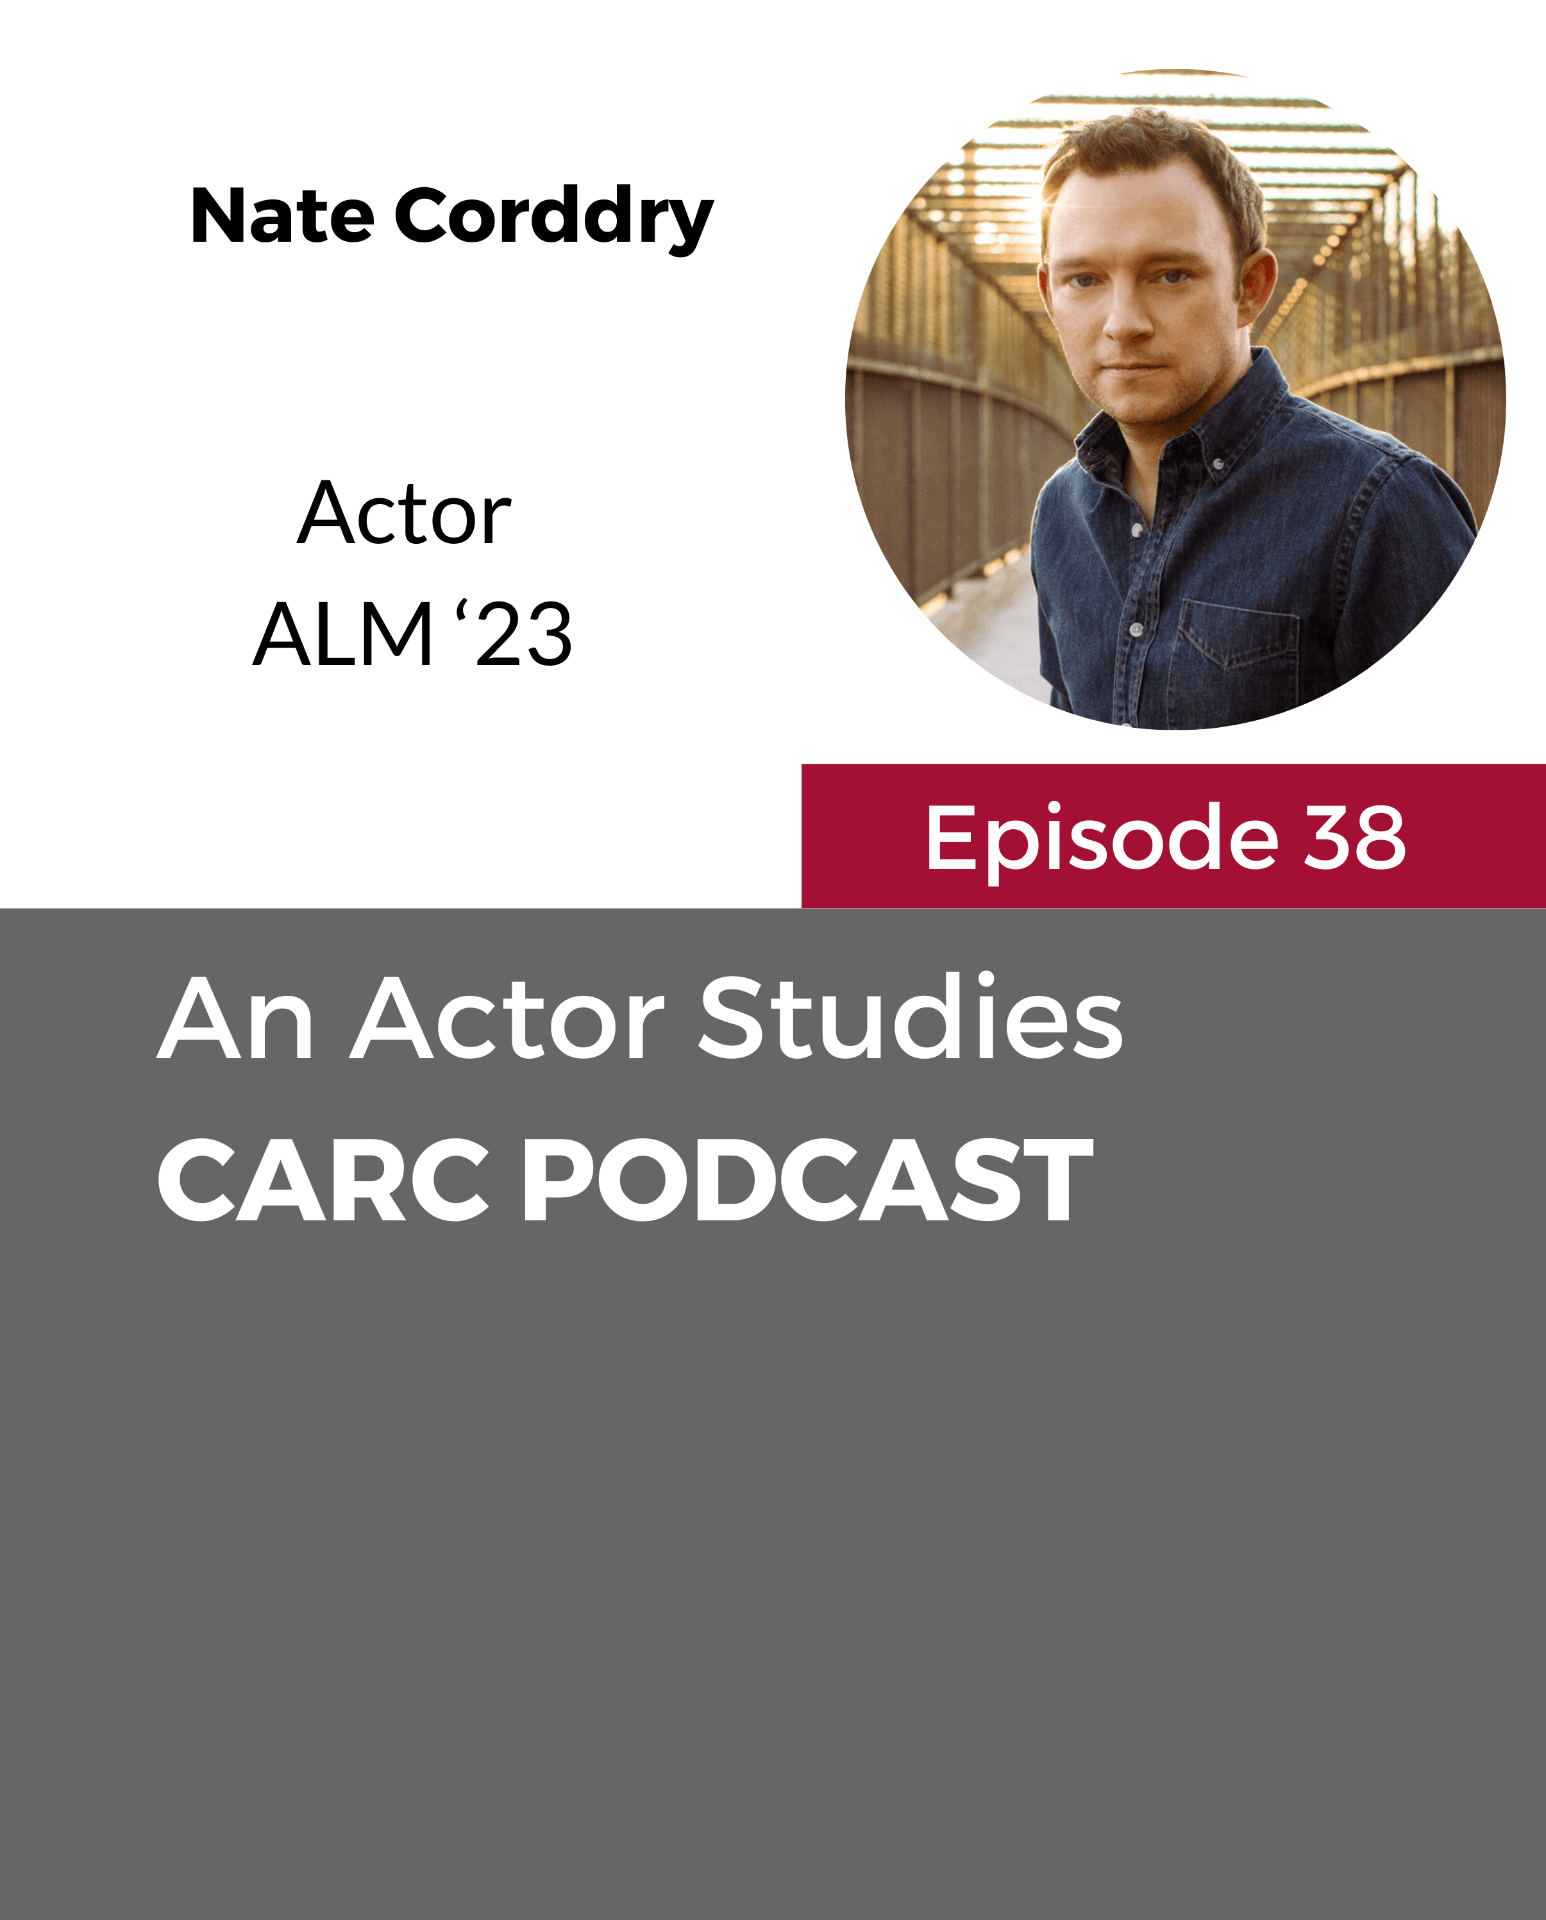 CARC Podcast, Episode 38, An Actor Studies with Nate Corddry